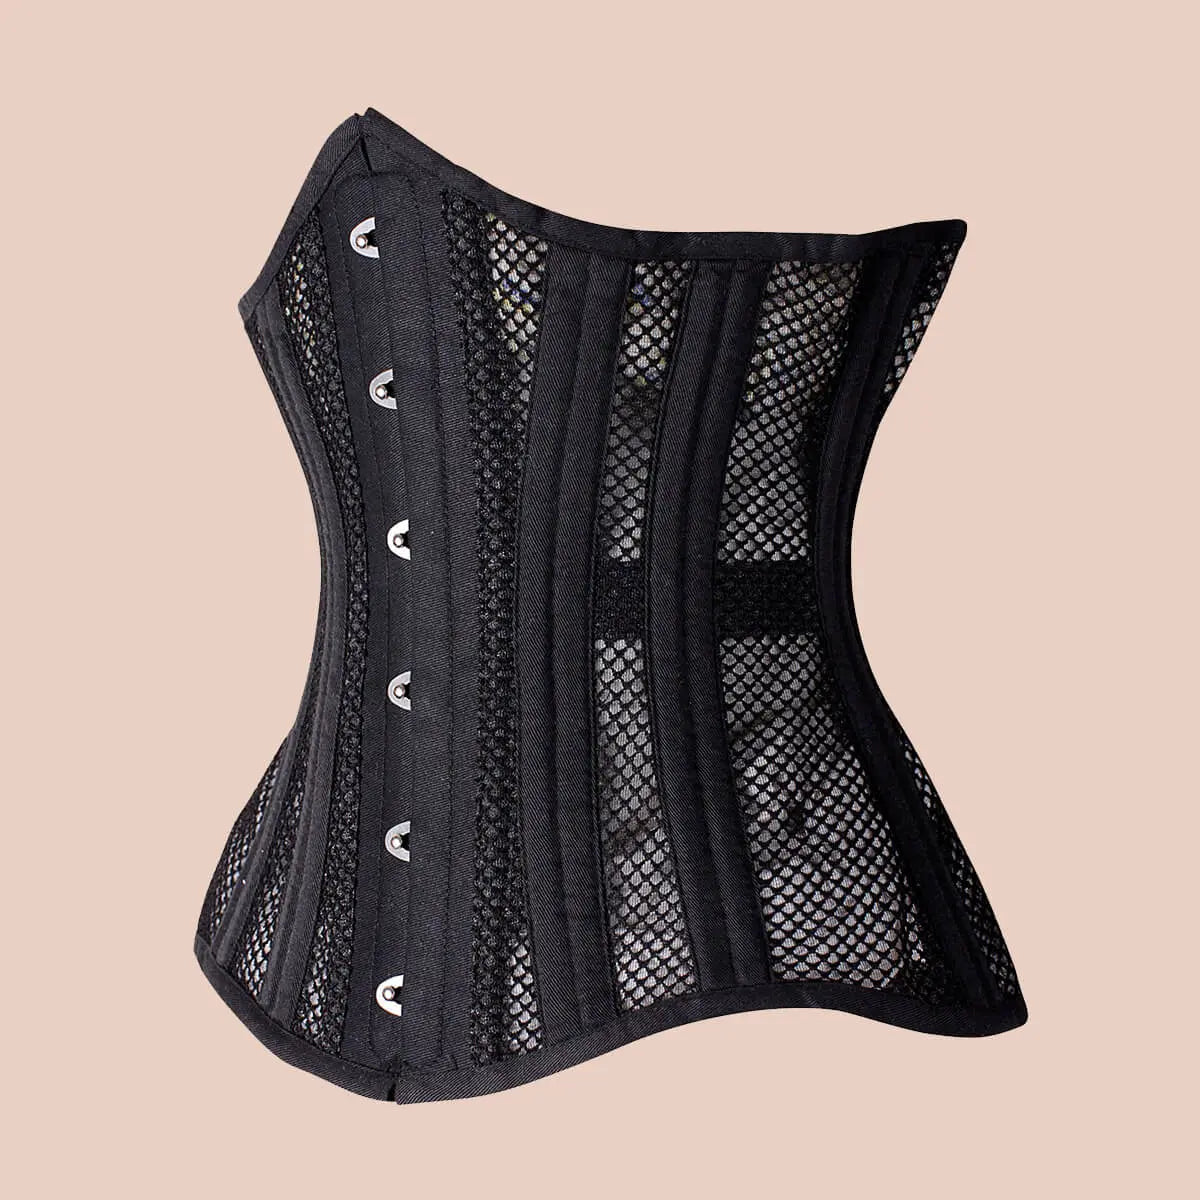 Orthopedic Latex Stomach Corset Body Shaper With 25 Steel Bones For  Slimming And Waist Training Modeling Strap And Belt Included 220104 From  Xuan007, $28.27